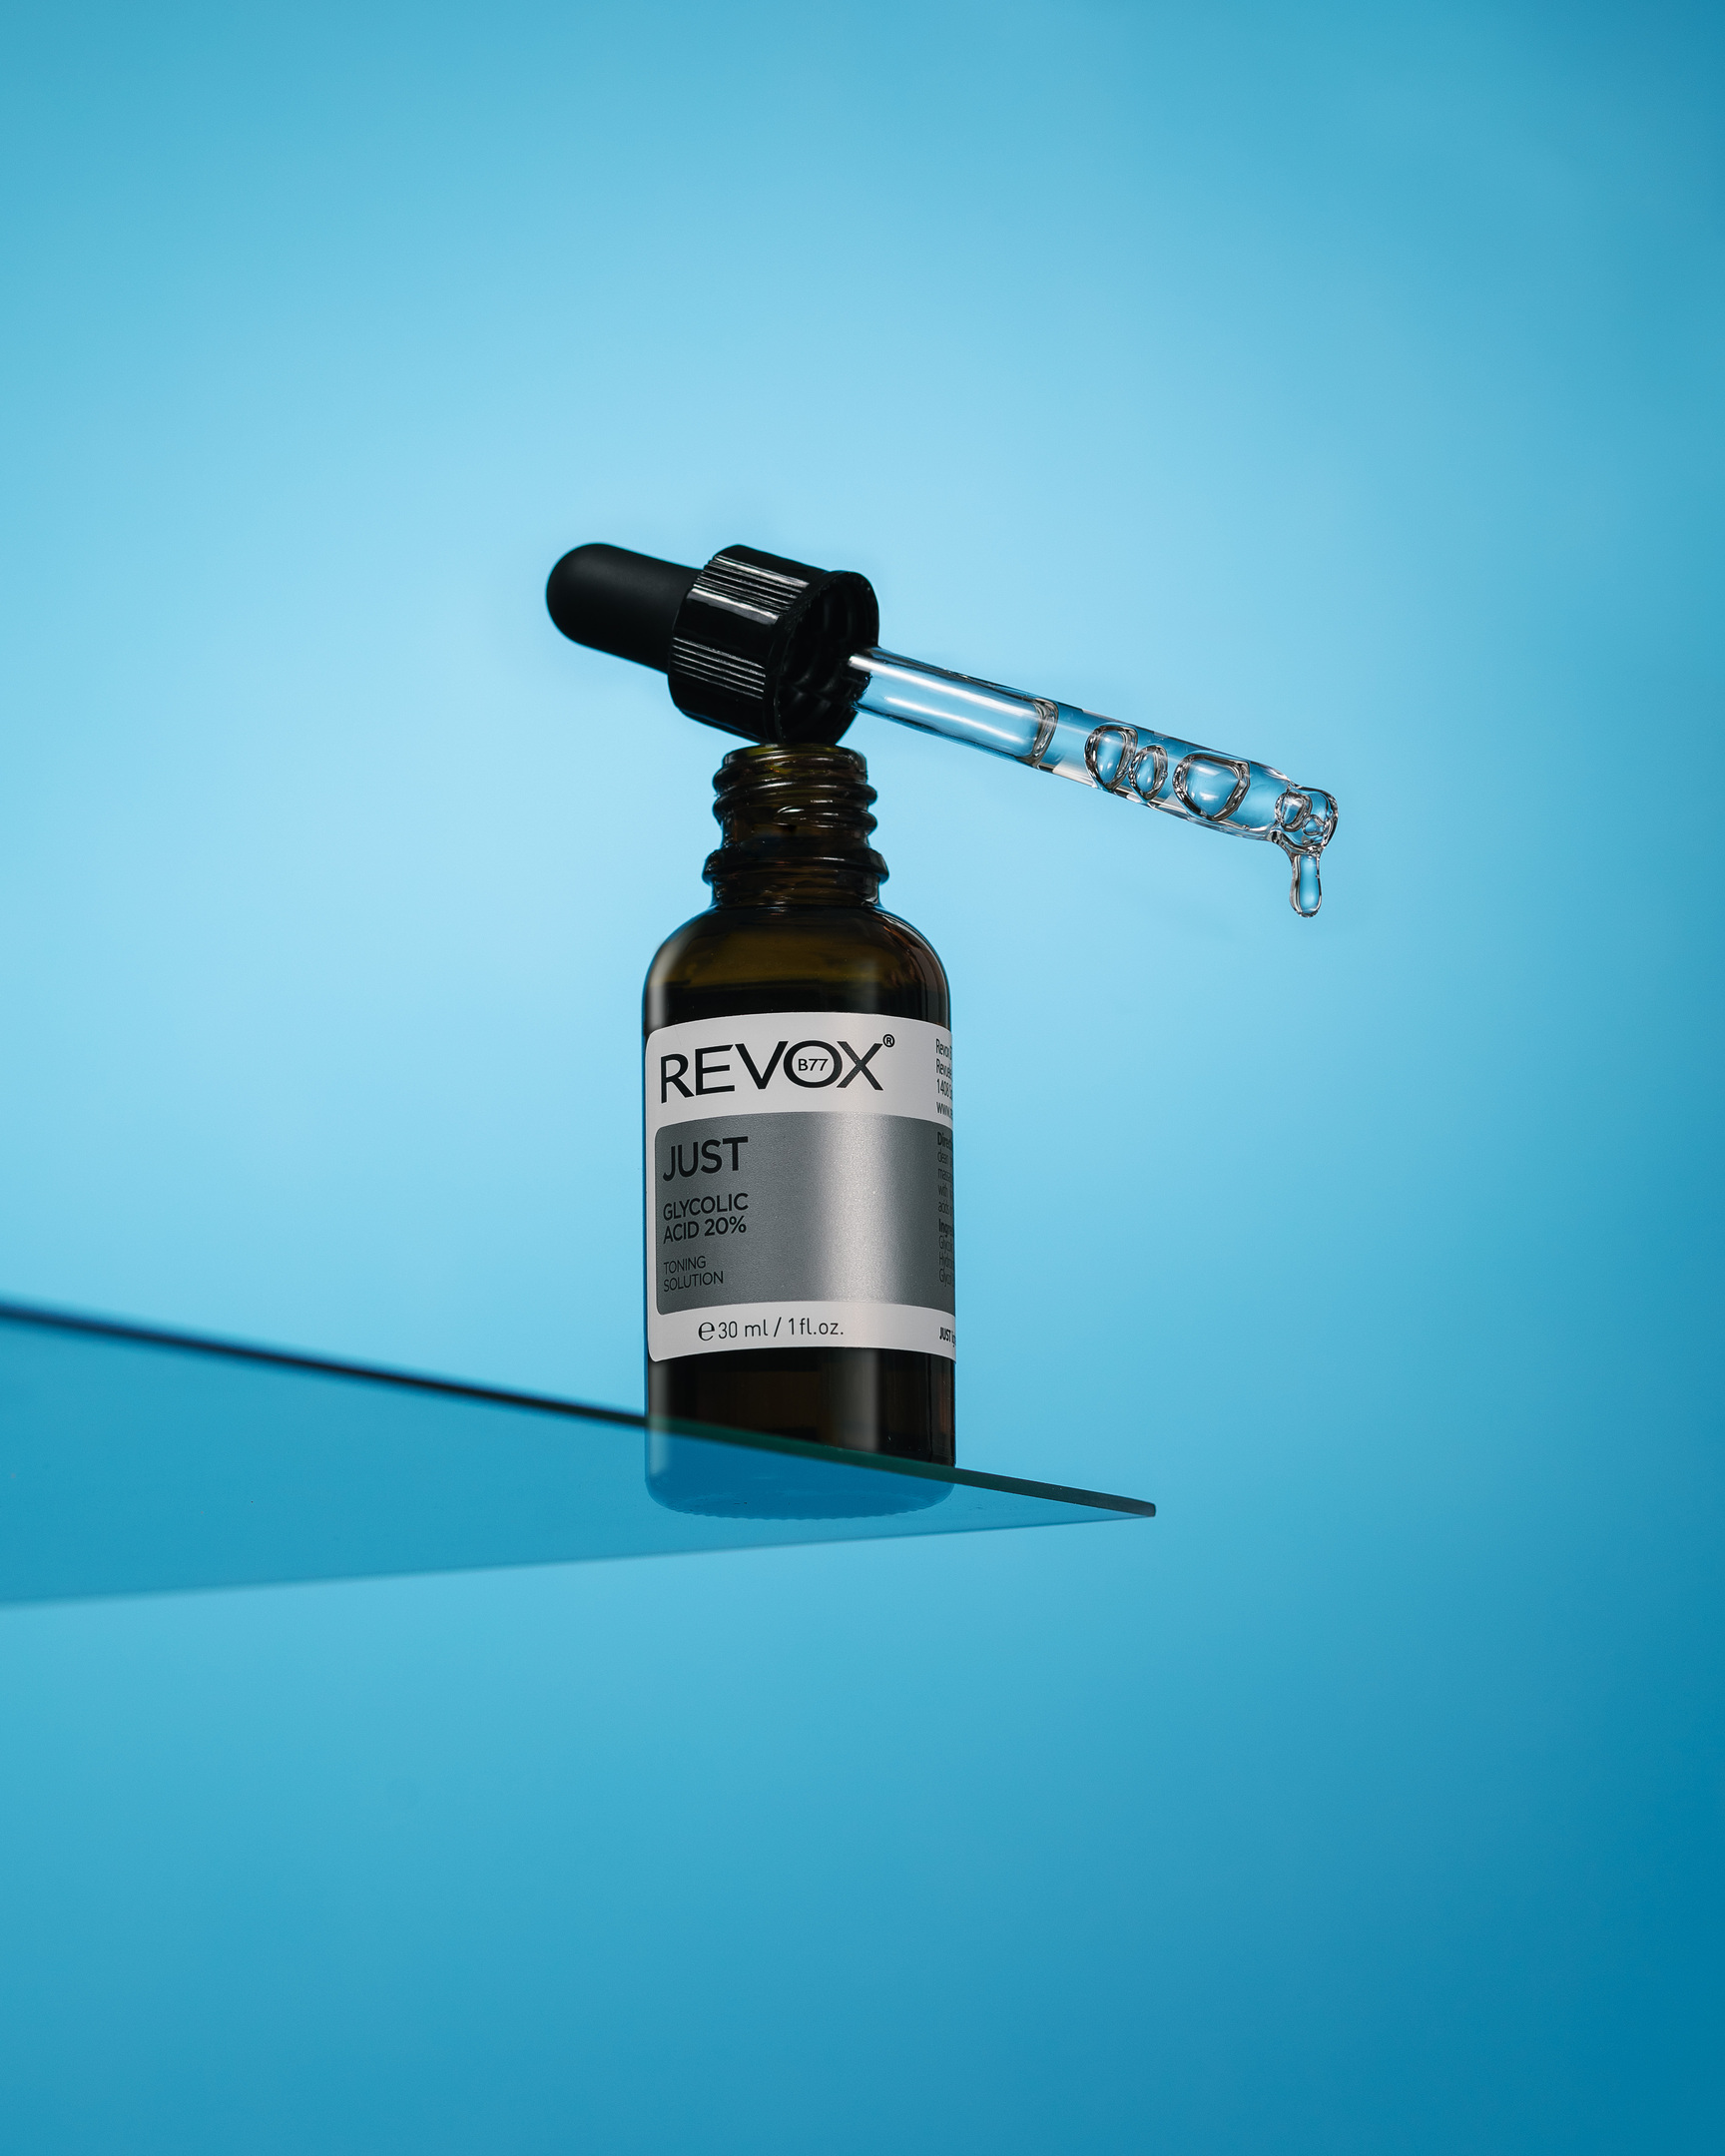 Revox - Just Glycolic Acid 20%. A bottle is on the edge of a glass.